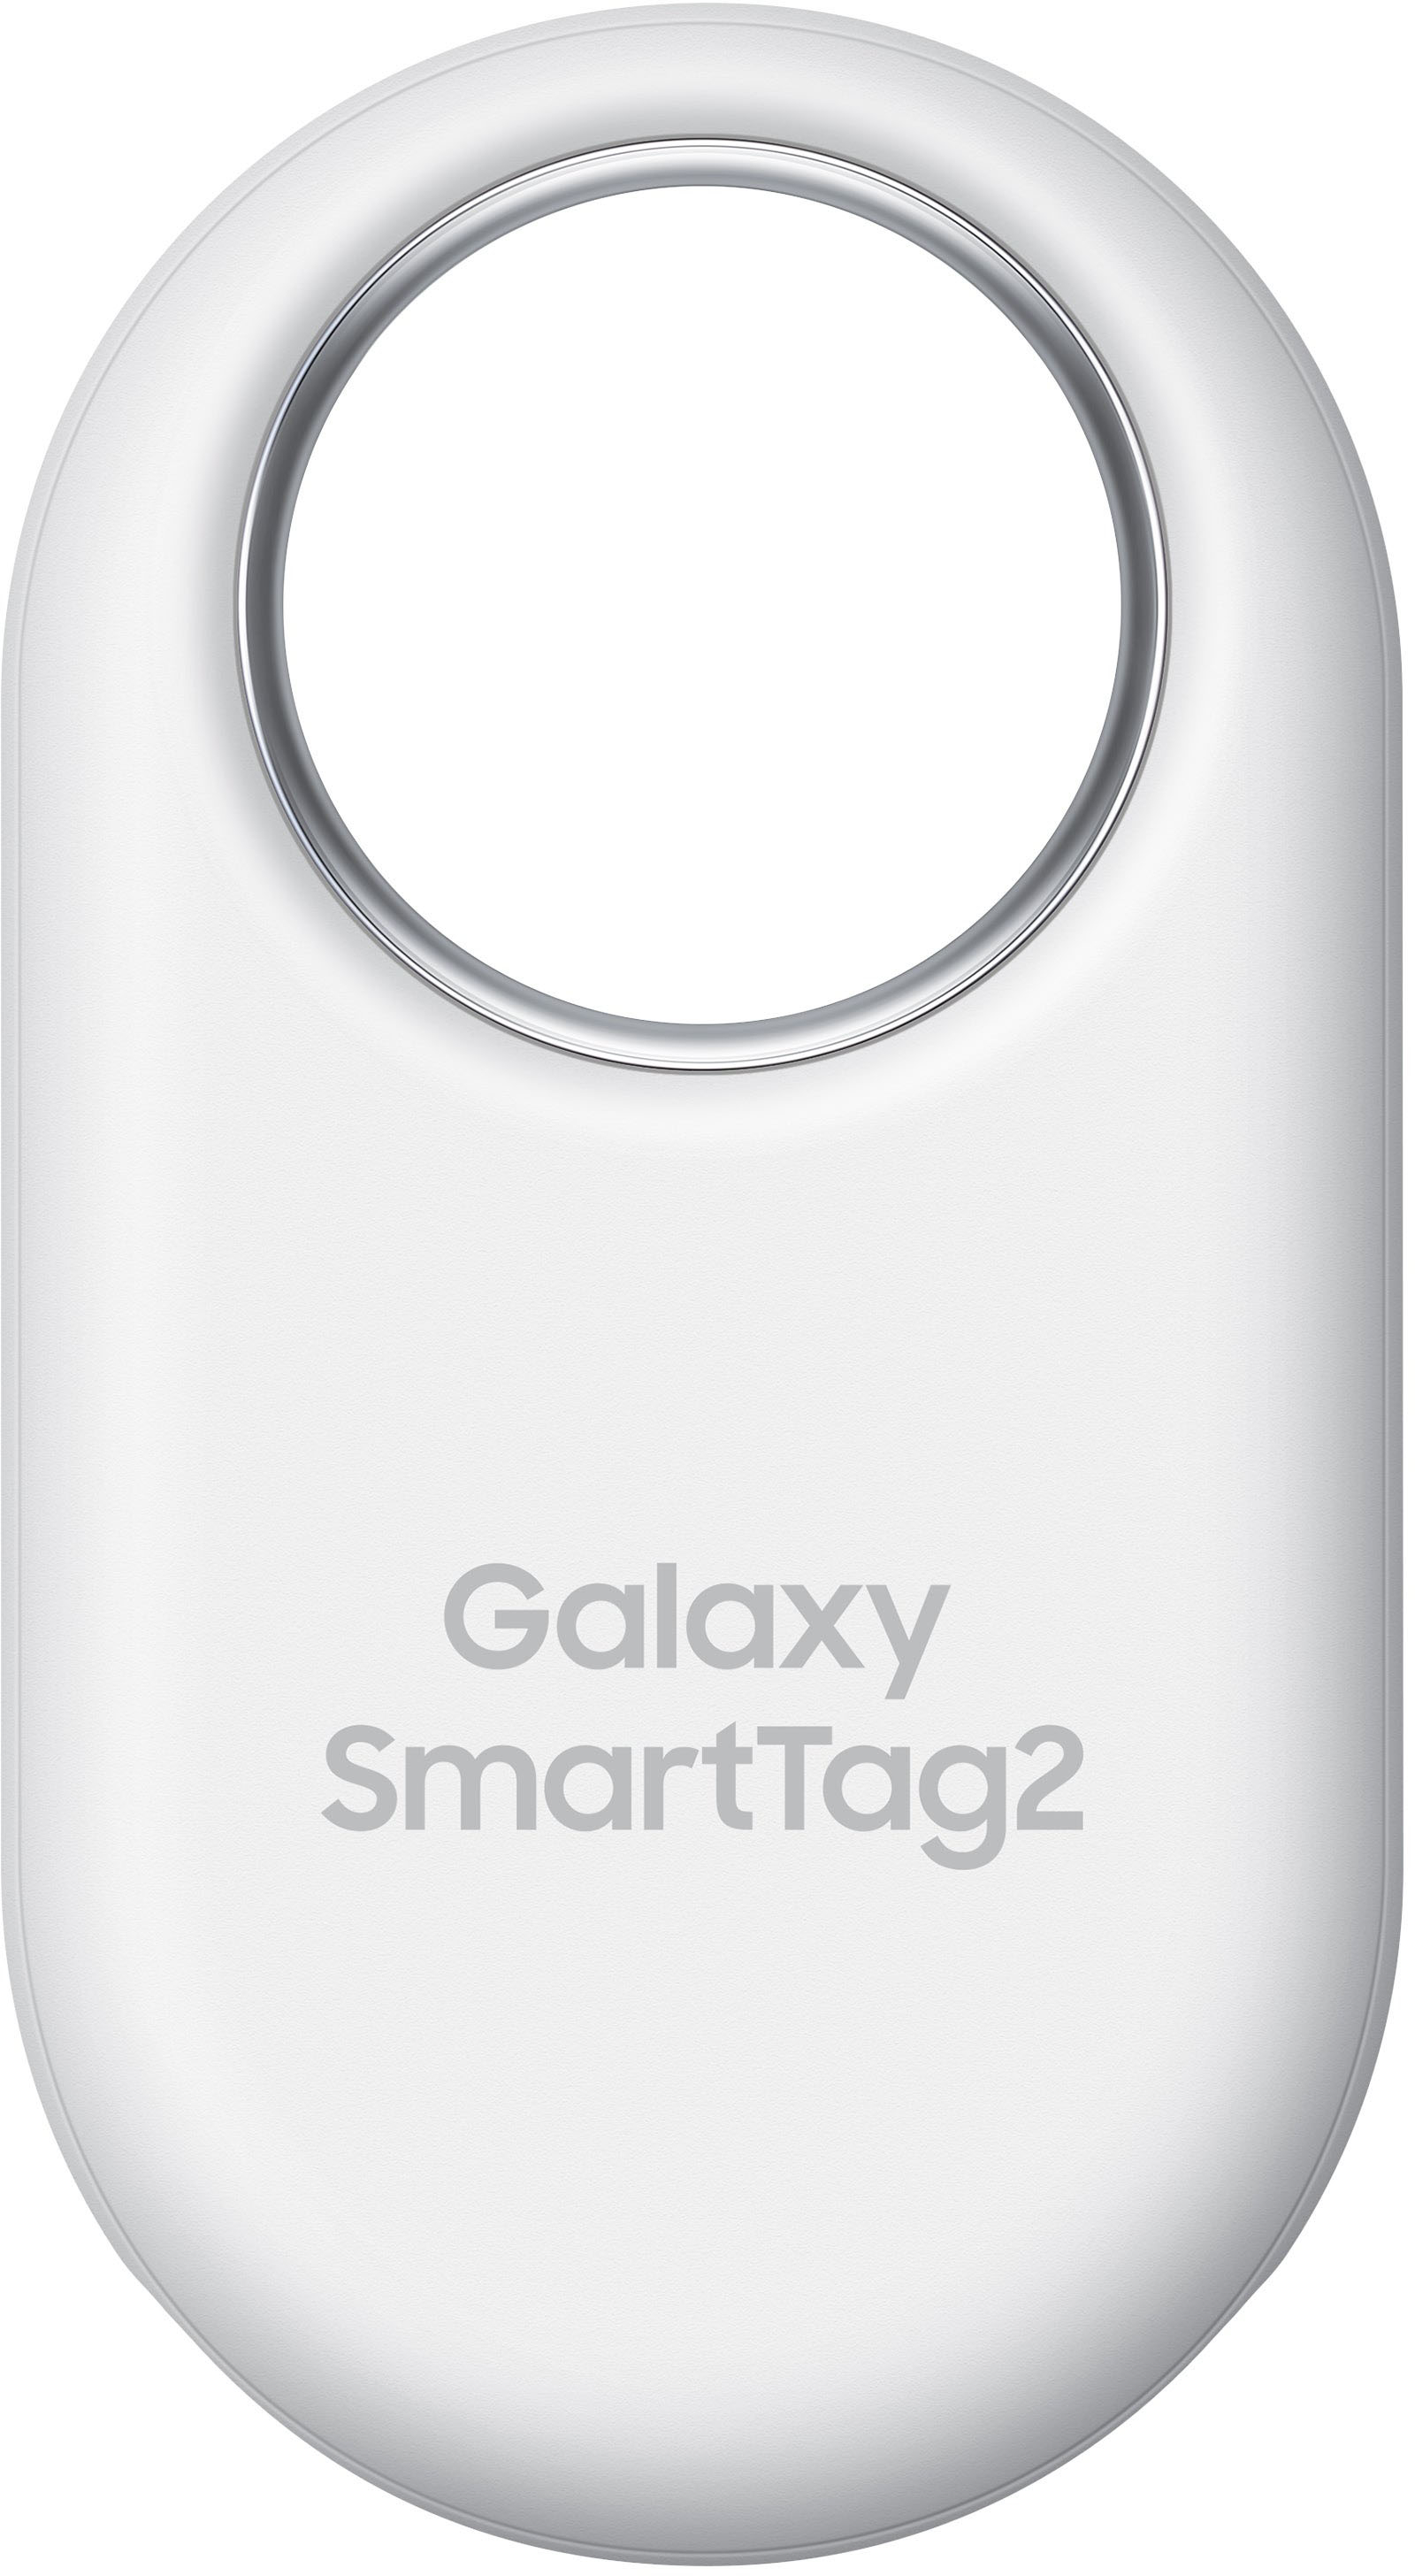 Samsung - Love it? Tag it. Find it! With our Galaxy SmartTag